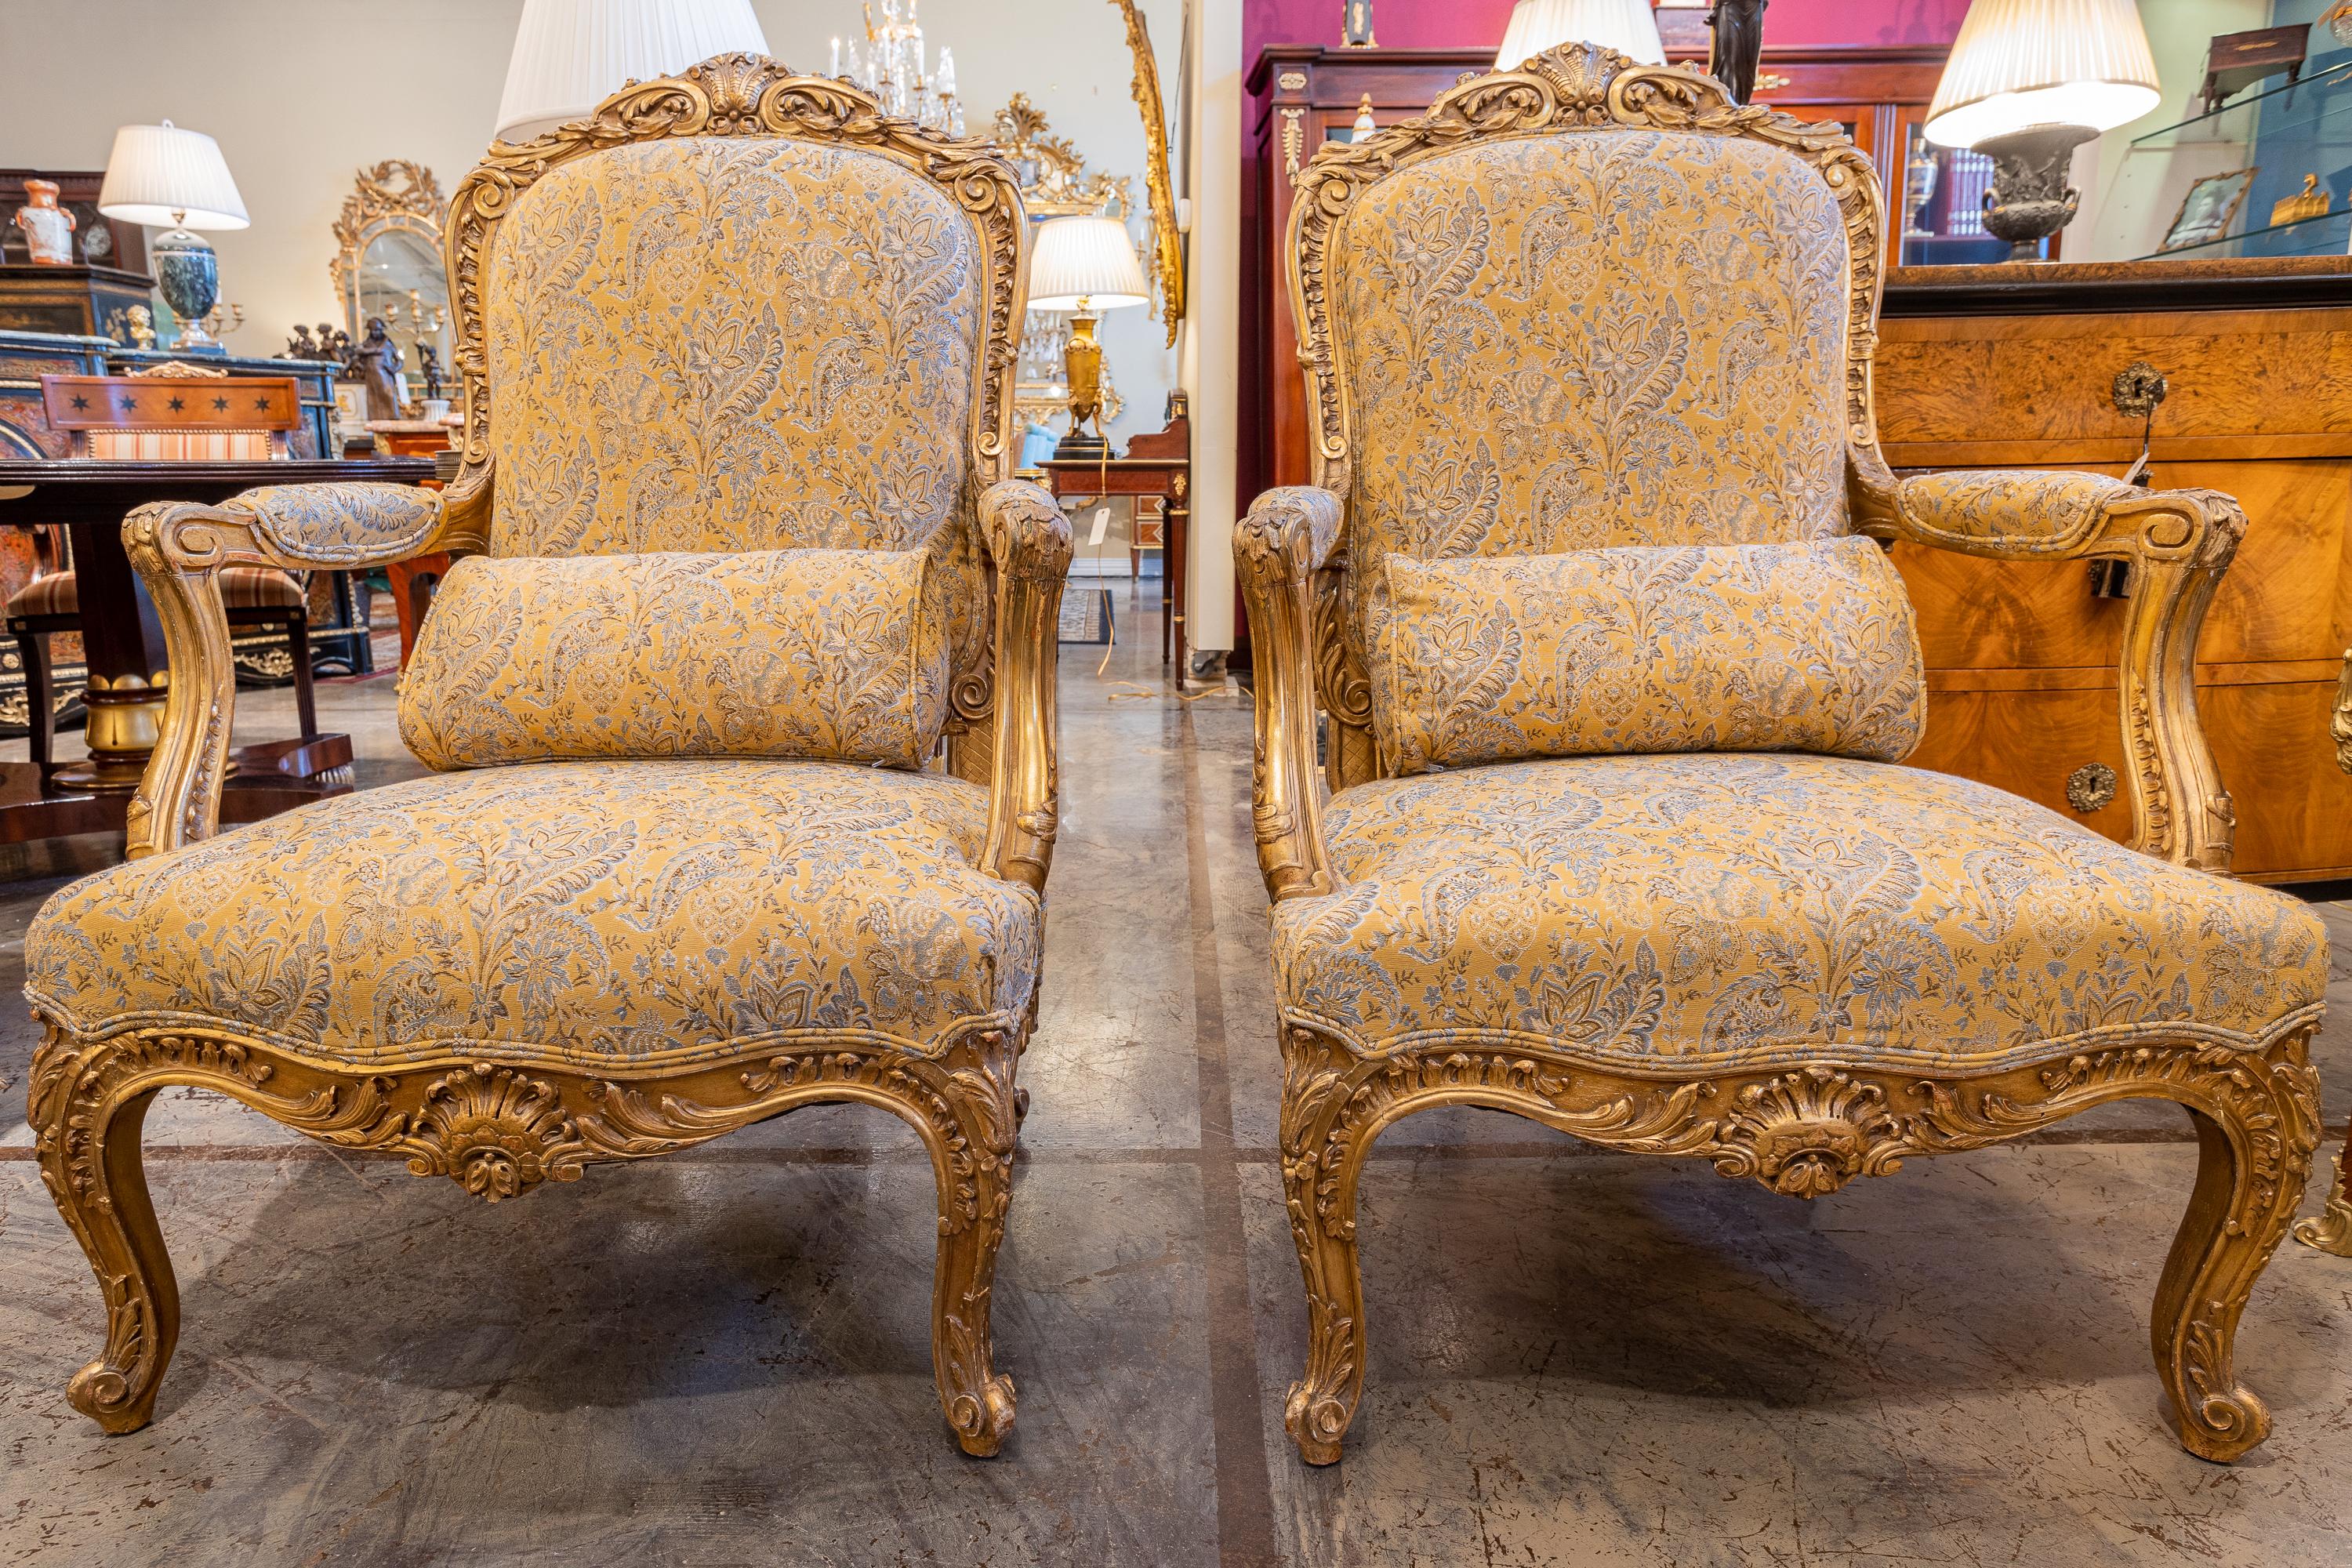 A fine large pair of French 19th century Louis XV gilt carved open armchairs. Covered in a French material